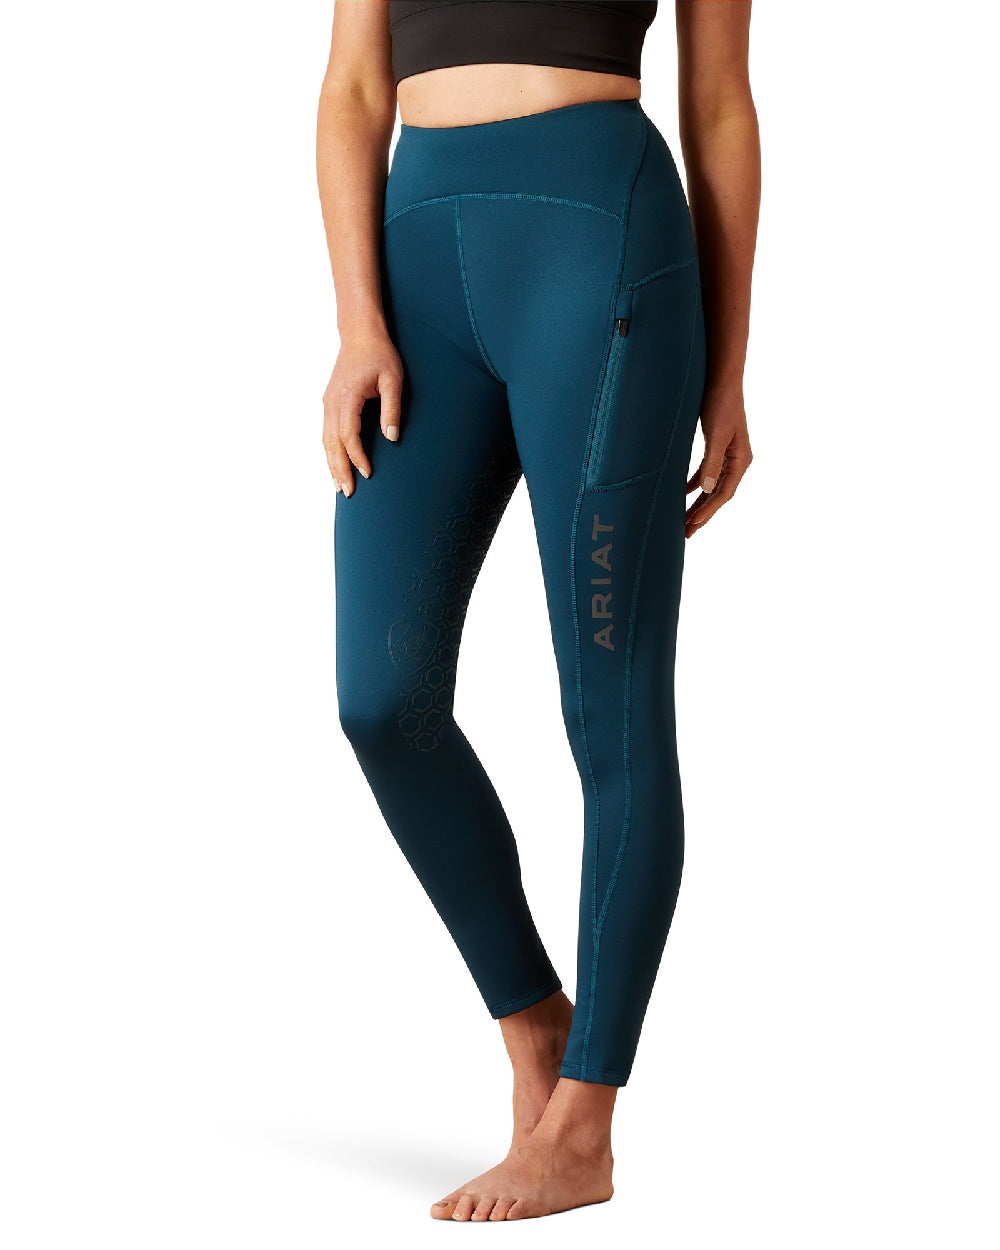 Ariat Womens Venture Thermal Half Grip Tights in Reflecting Pond 